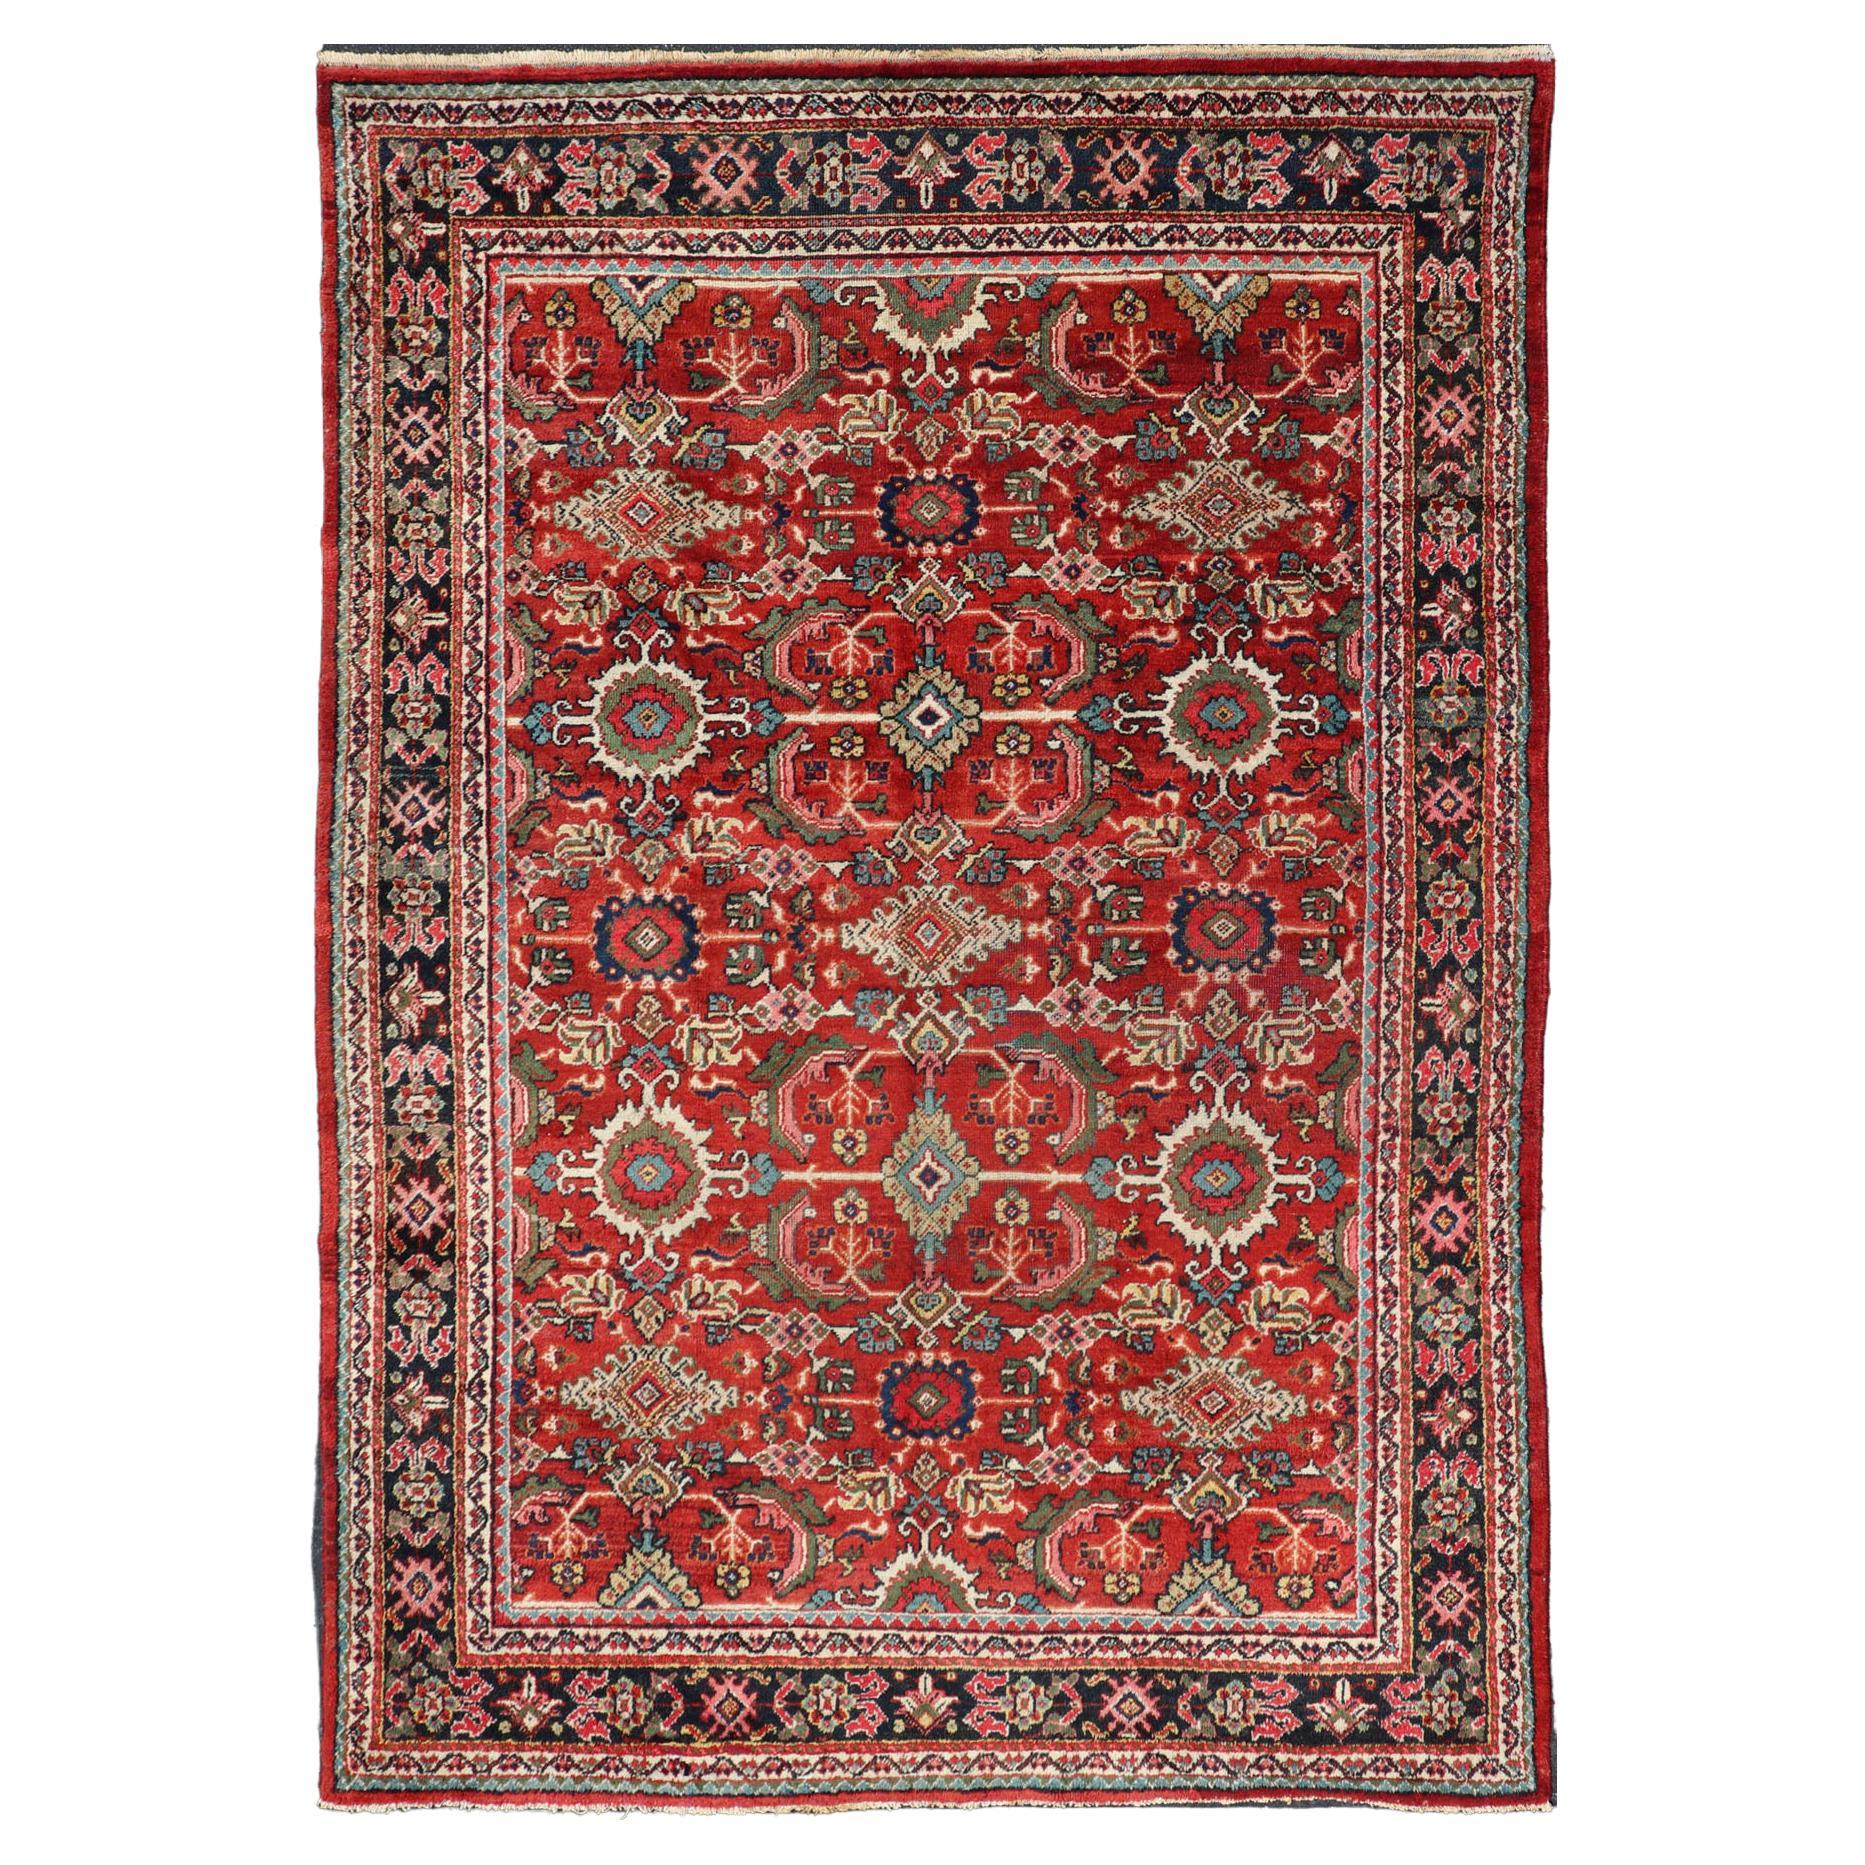 Antique Persian Mahal Rug with All-Over Sub-Geometric Design in Red Background